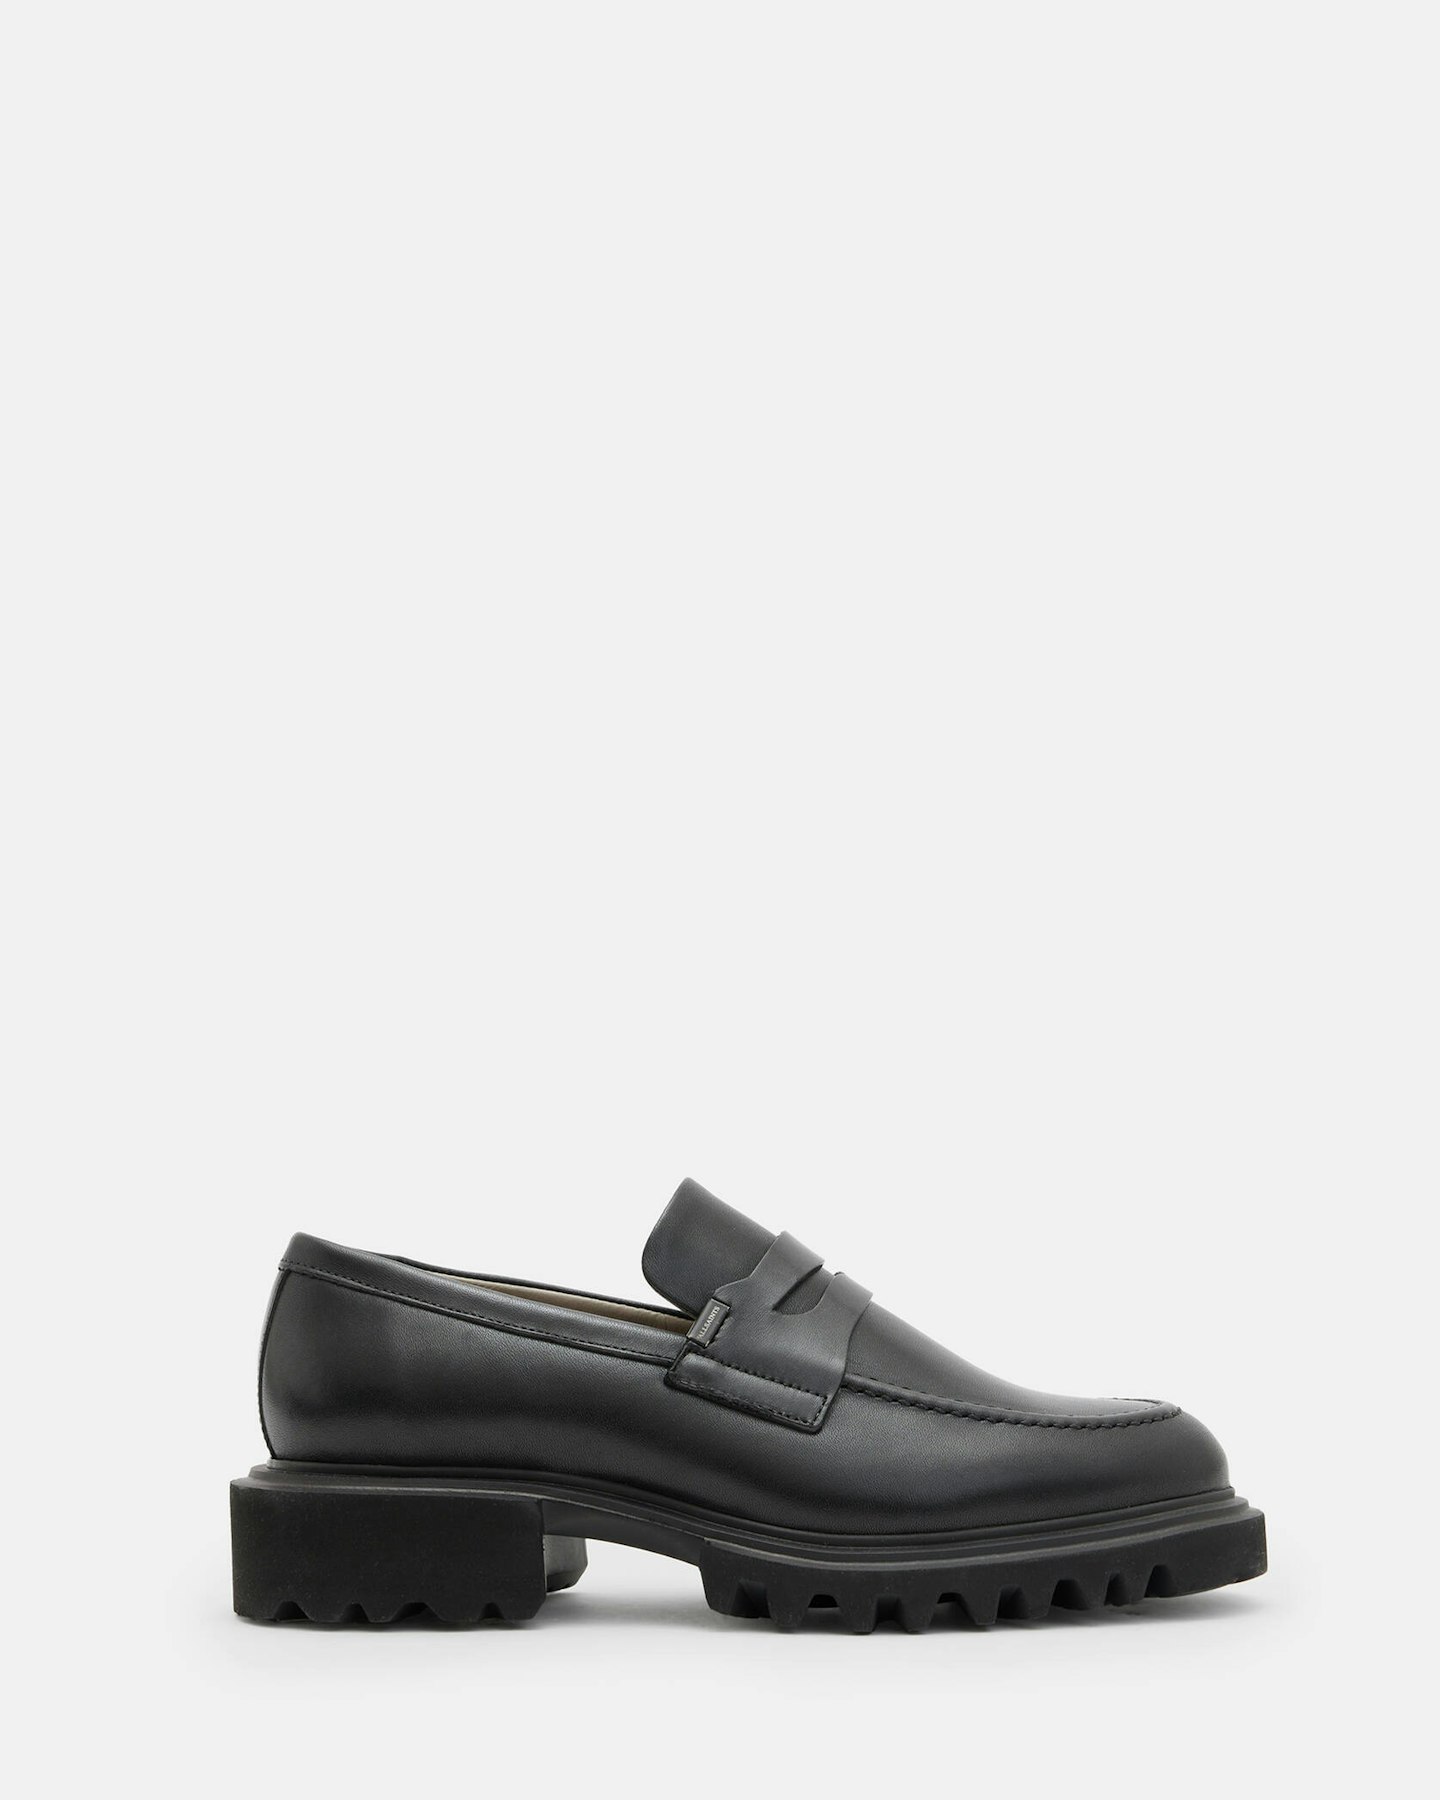 Lola Leather Loafers